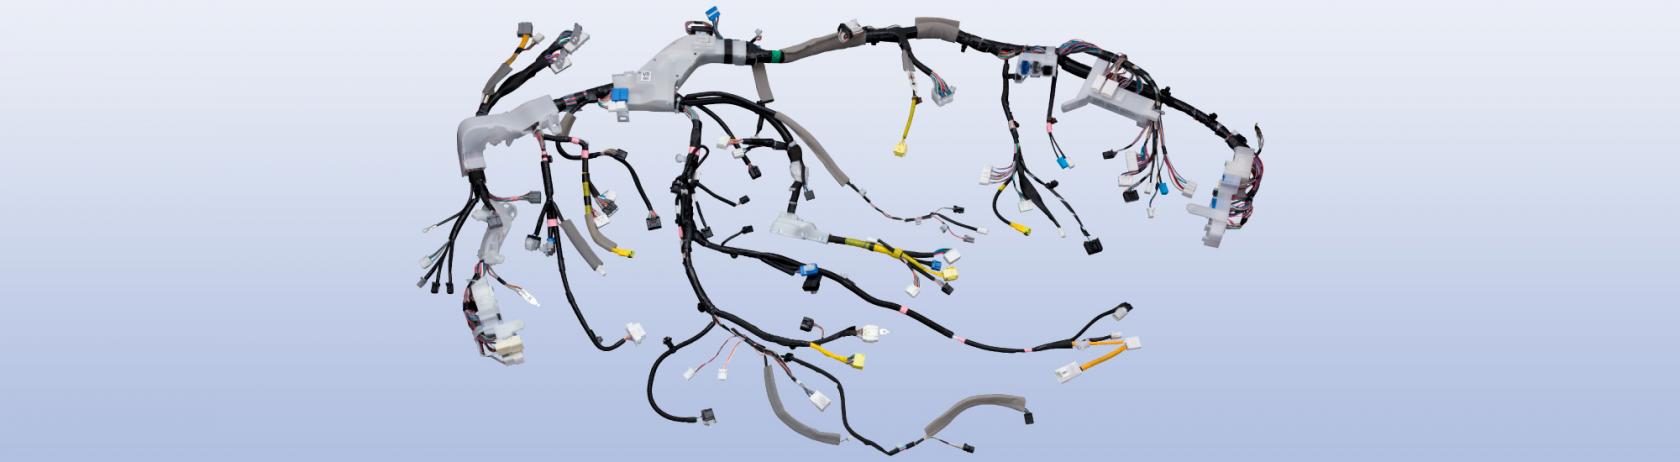 Wiring harnesses running to every corner of a car